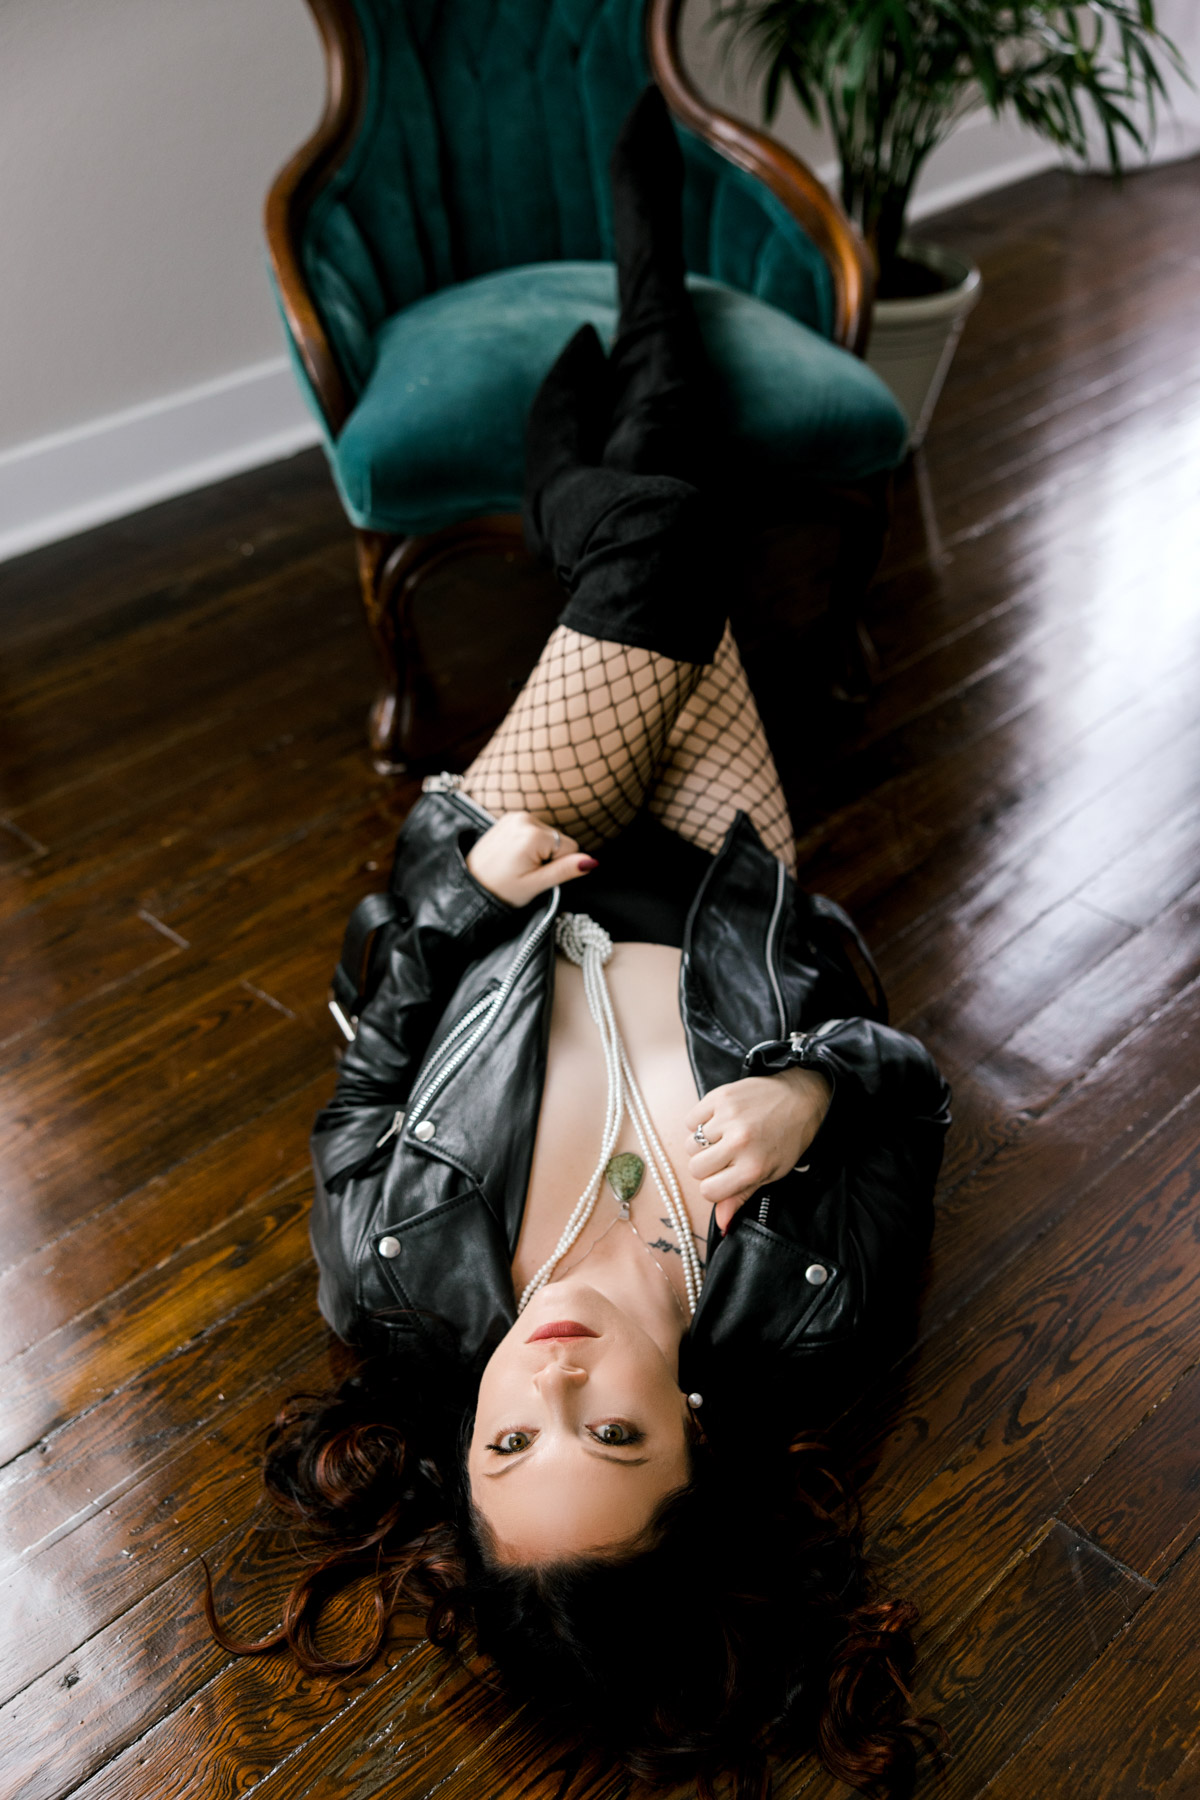 Woman laying on the floor wearing black leather jacket, fishnet stockings and accessories. 